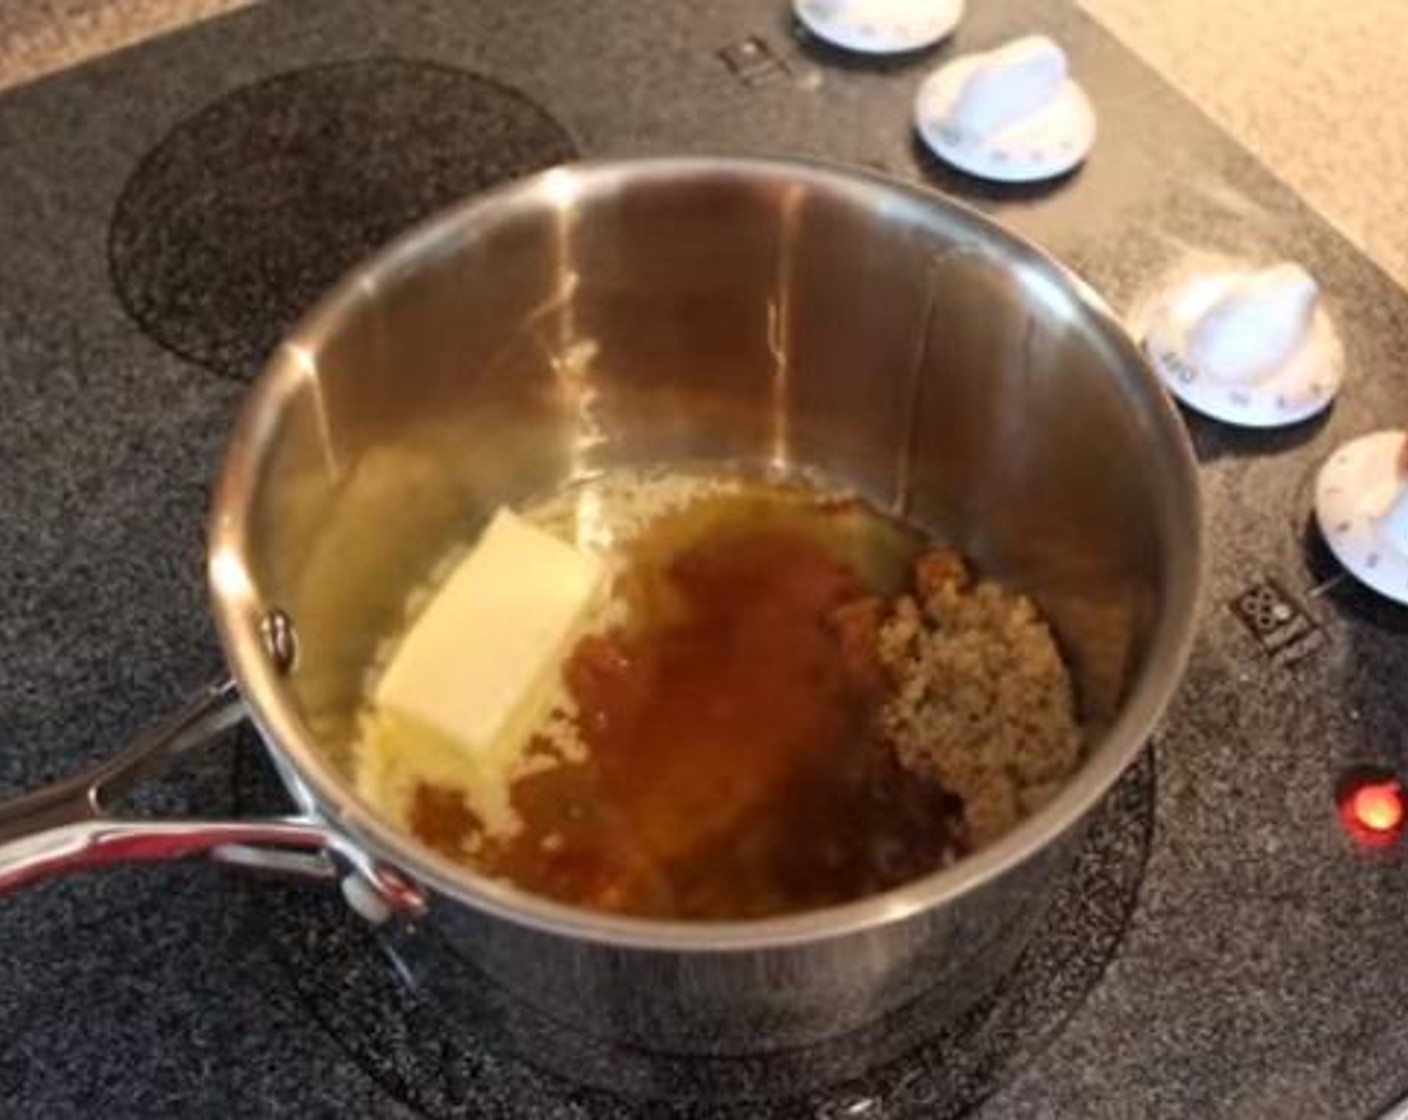 step 5 In a small saucepot over medium heat add Salted Butter (1/2 cup), Brown Sugar (1/4 cup), Honey (2 1/2 Tbsp), Bourbon (2 fl oz), and Dijon Mustard (1 Tbsp). Stir until combined and reduce by half about 8 minutes. Remove from heat and allow to cool.